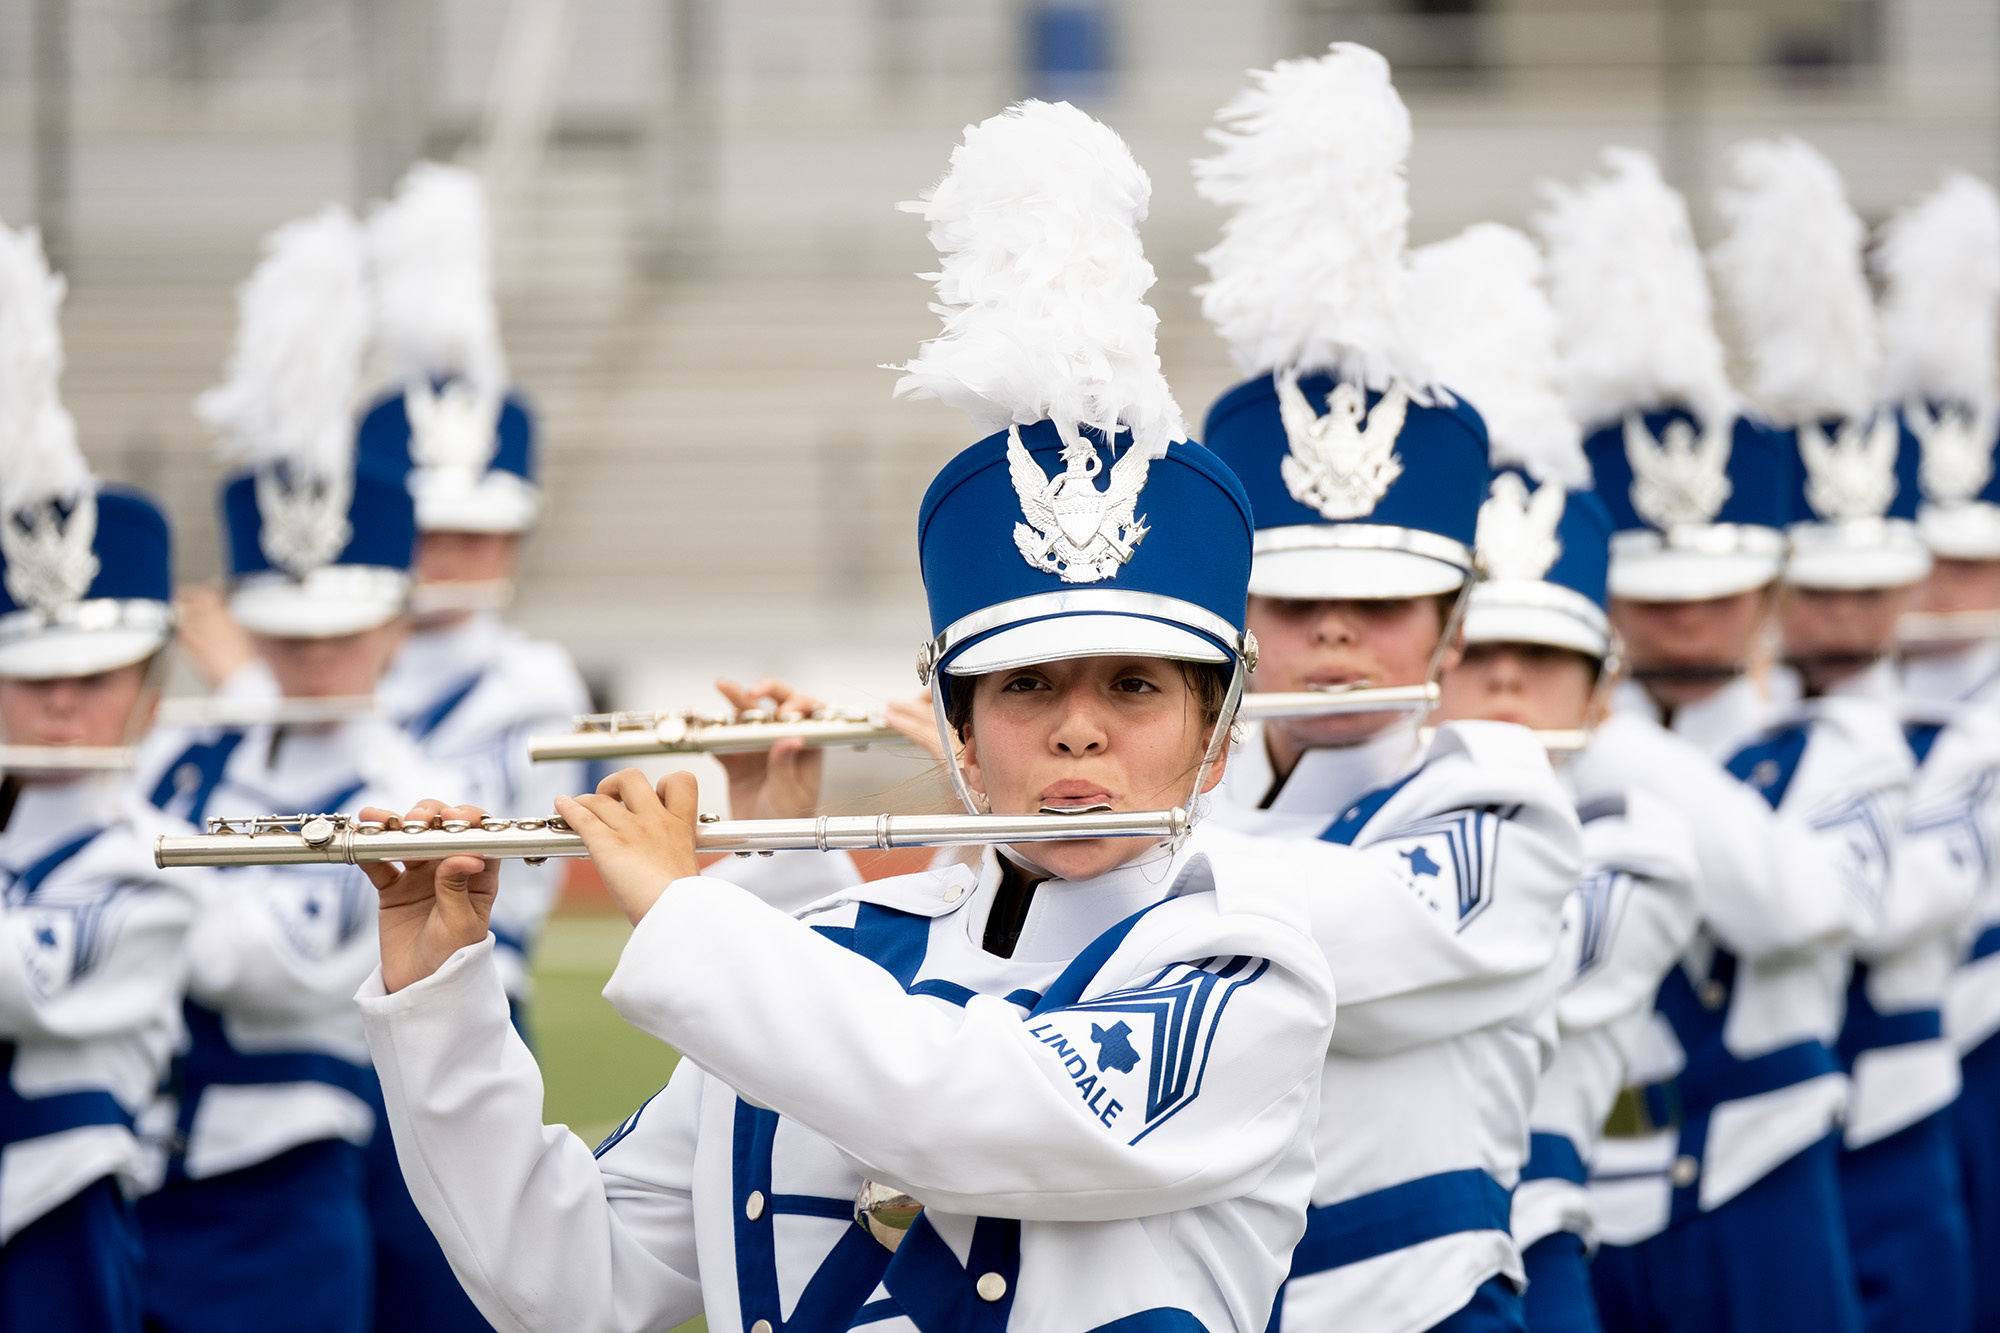 Marching Band: Lindale, TX, State military marching band champions, An orchestra that marches and plays music at the same time. 2000x1340 HD Wallpaper.